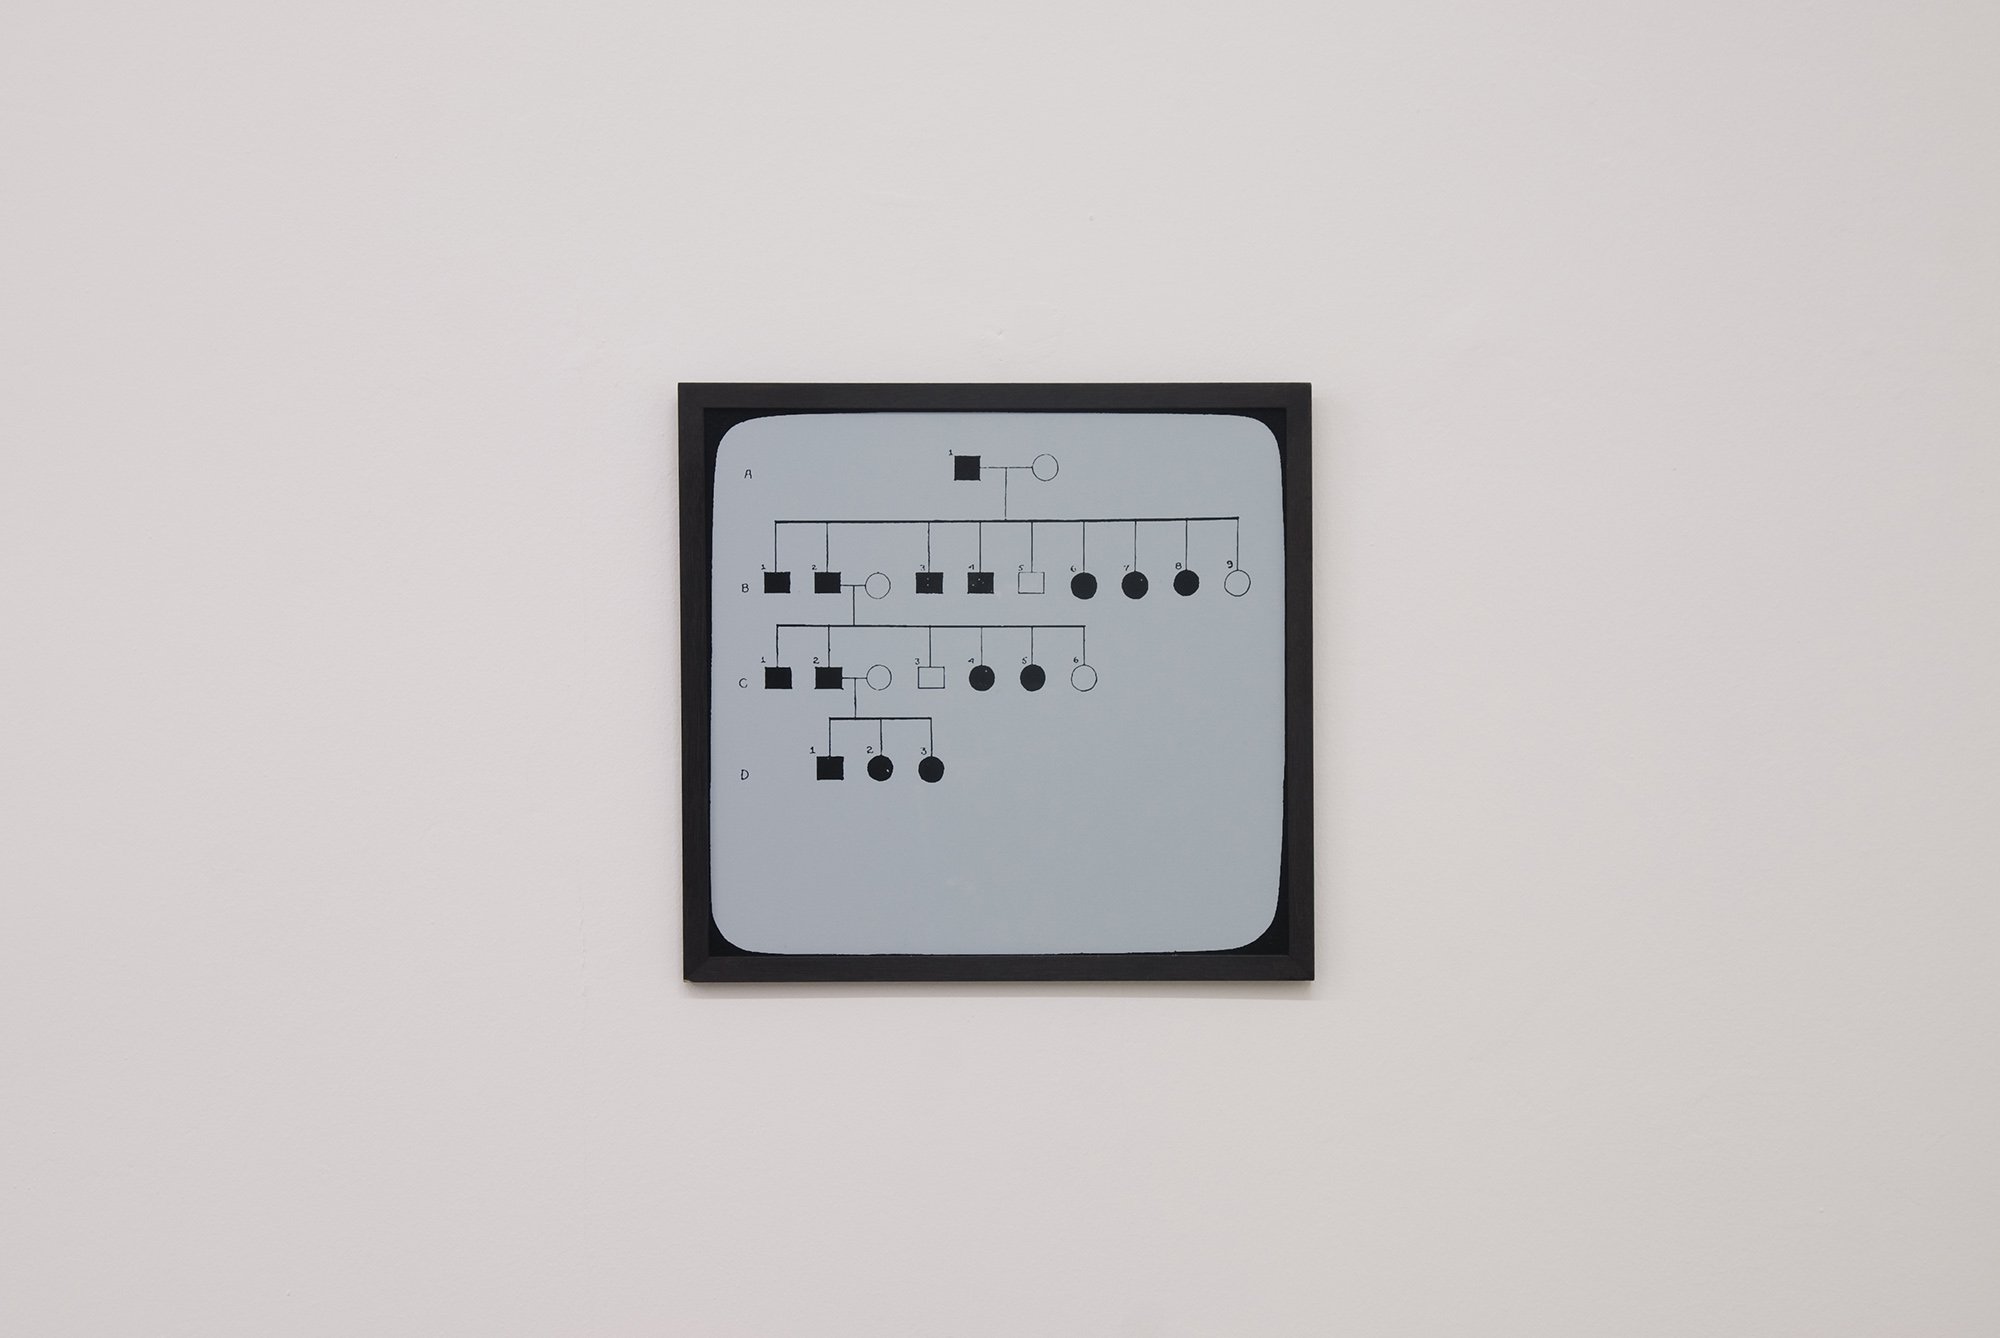 Gabriel Lester, Pedigree-A-B-W-family-musical-literary-and inventive-ability, silkscreen, 37 x 35 cm (14 5/8 x 13 3/4 in), 2010. Installation view, DiLSiZ, Rodeo, Istanbul, 2010 – 2011